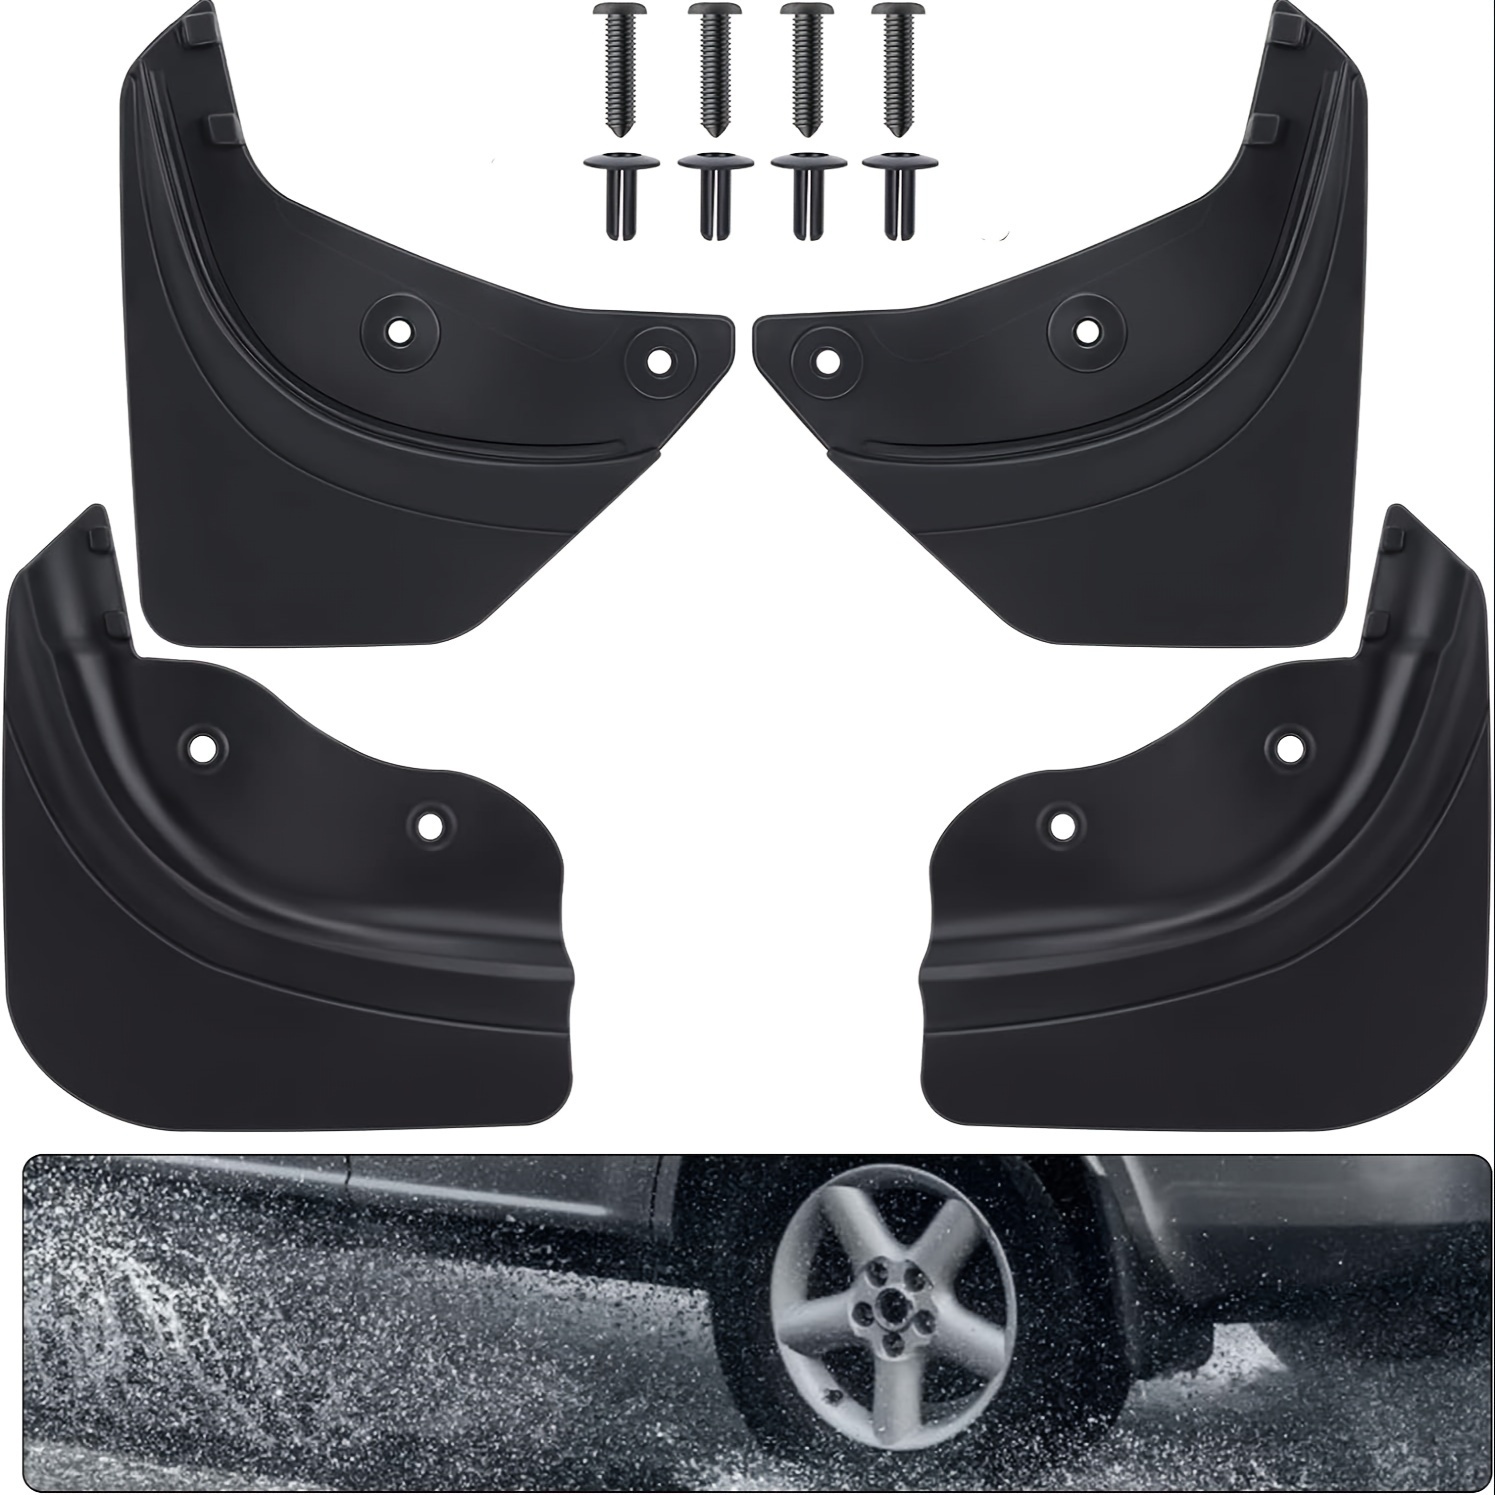 4 Pcs Car Mud Flaps Reflective Soft Rubber Splash Guards Rubber mud Guard  Car Safety Warning Reflective Mud Flaps No Collision for Universal Vehicle